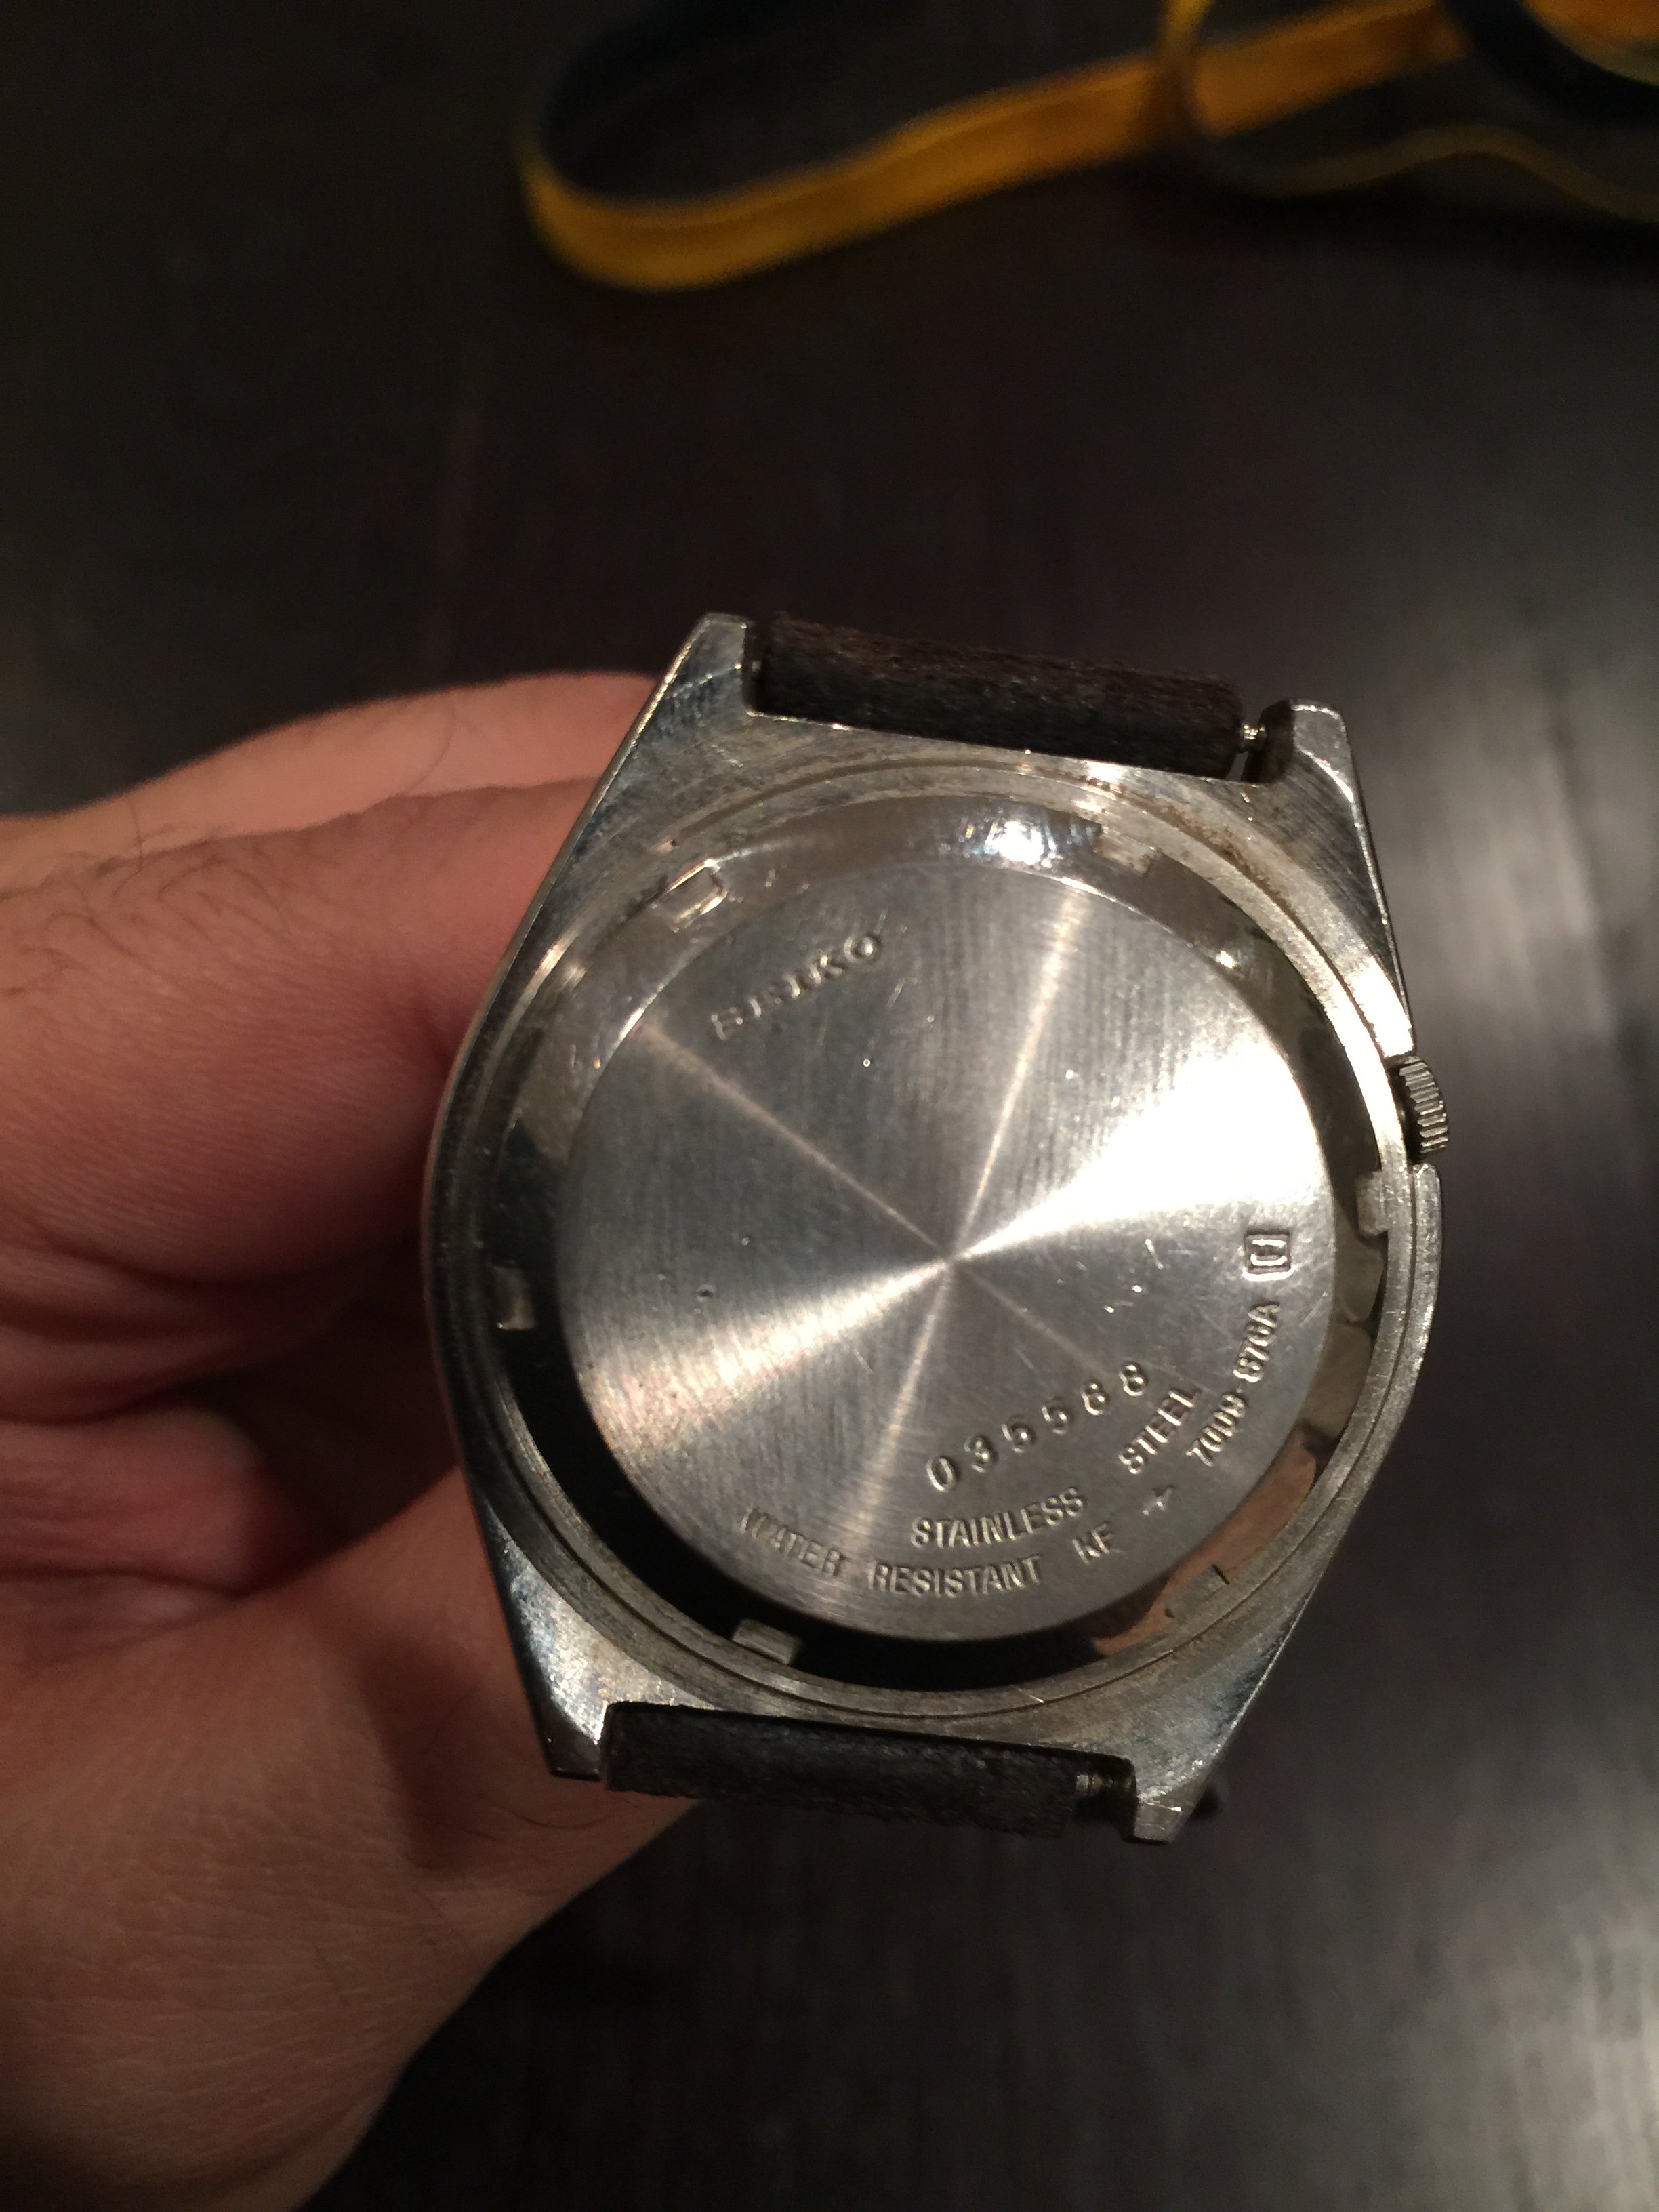 Dating an old Seiko 5 | Omega Forums